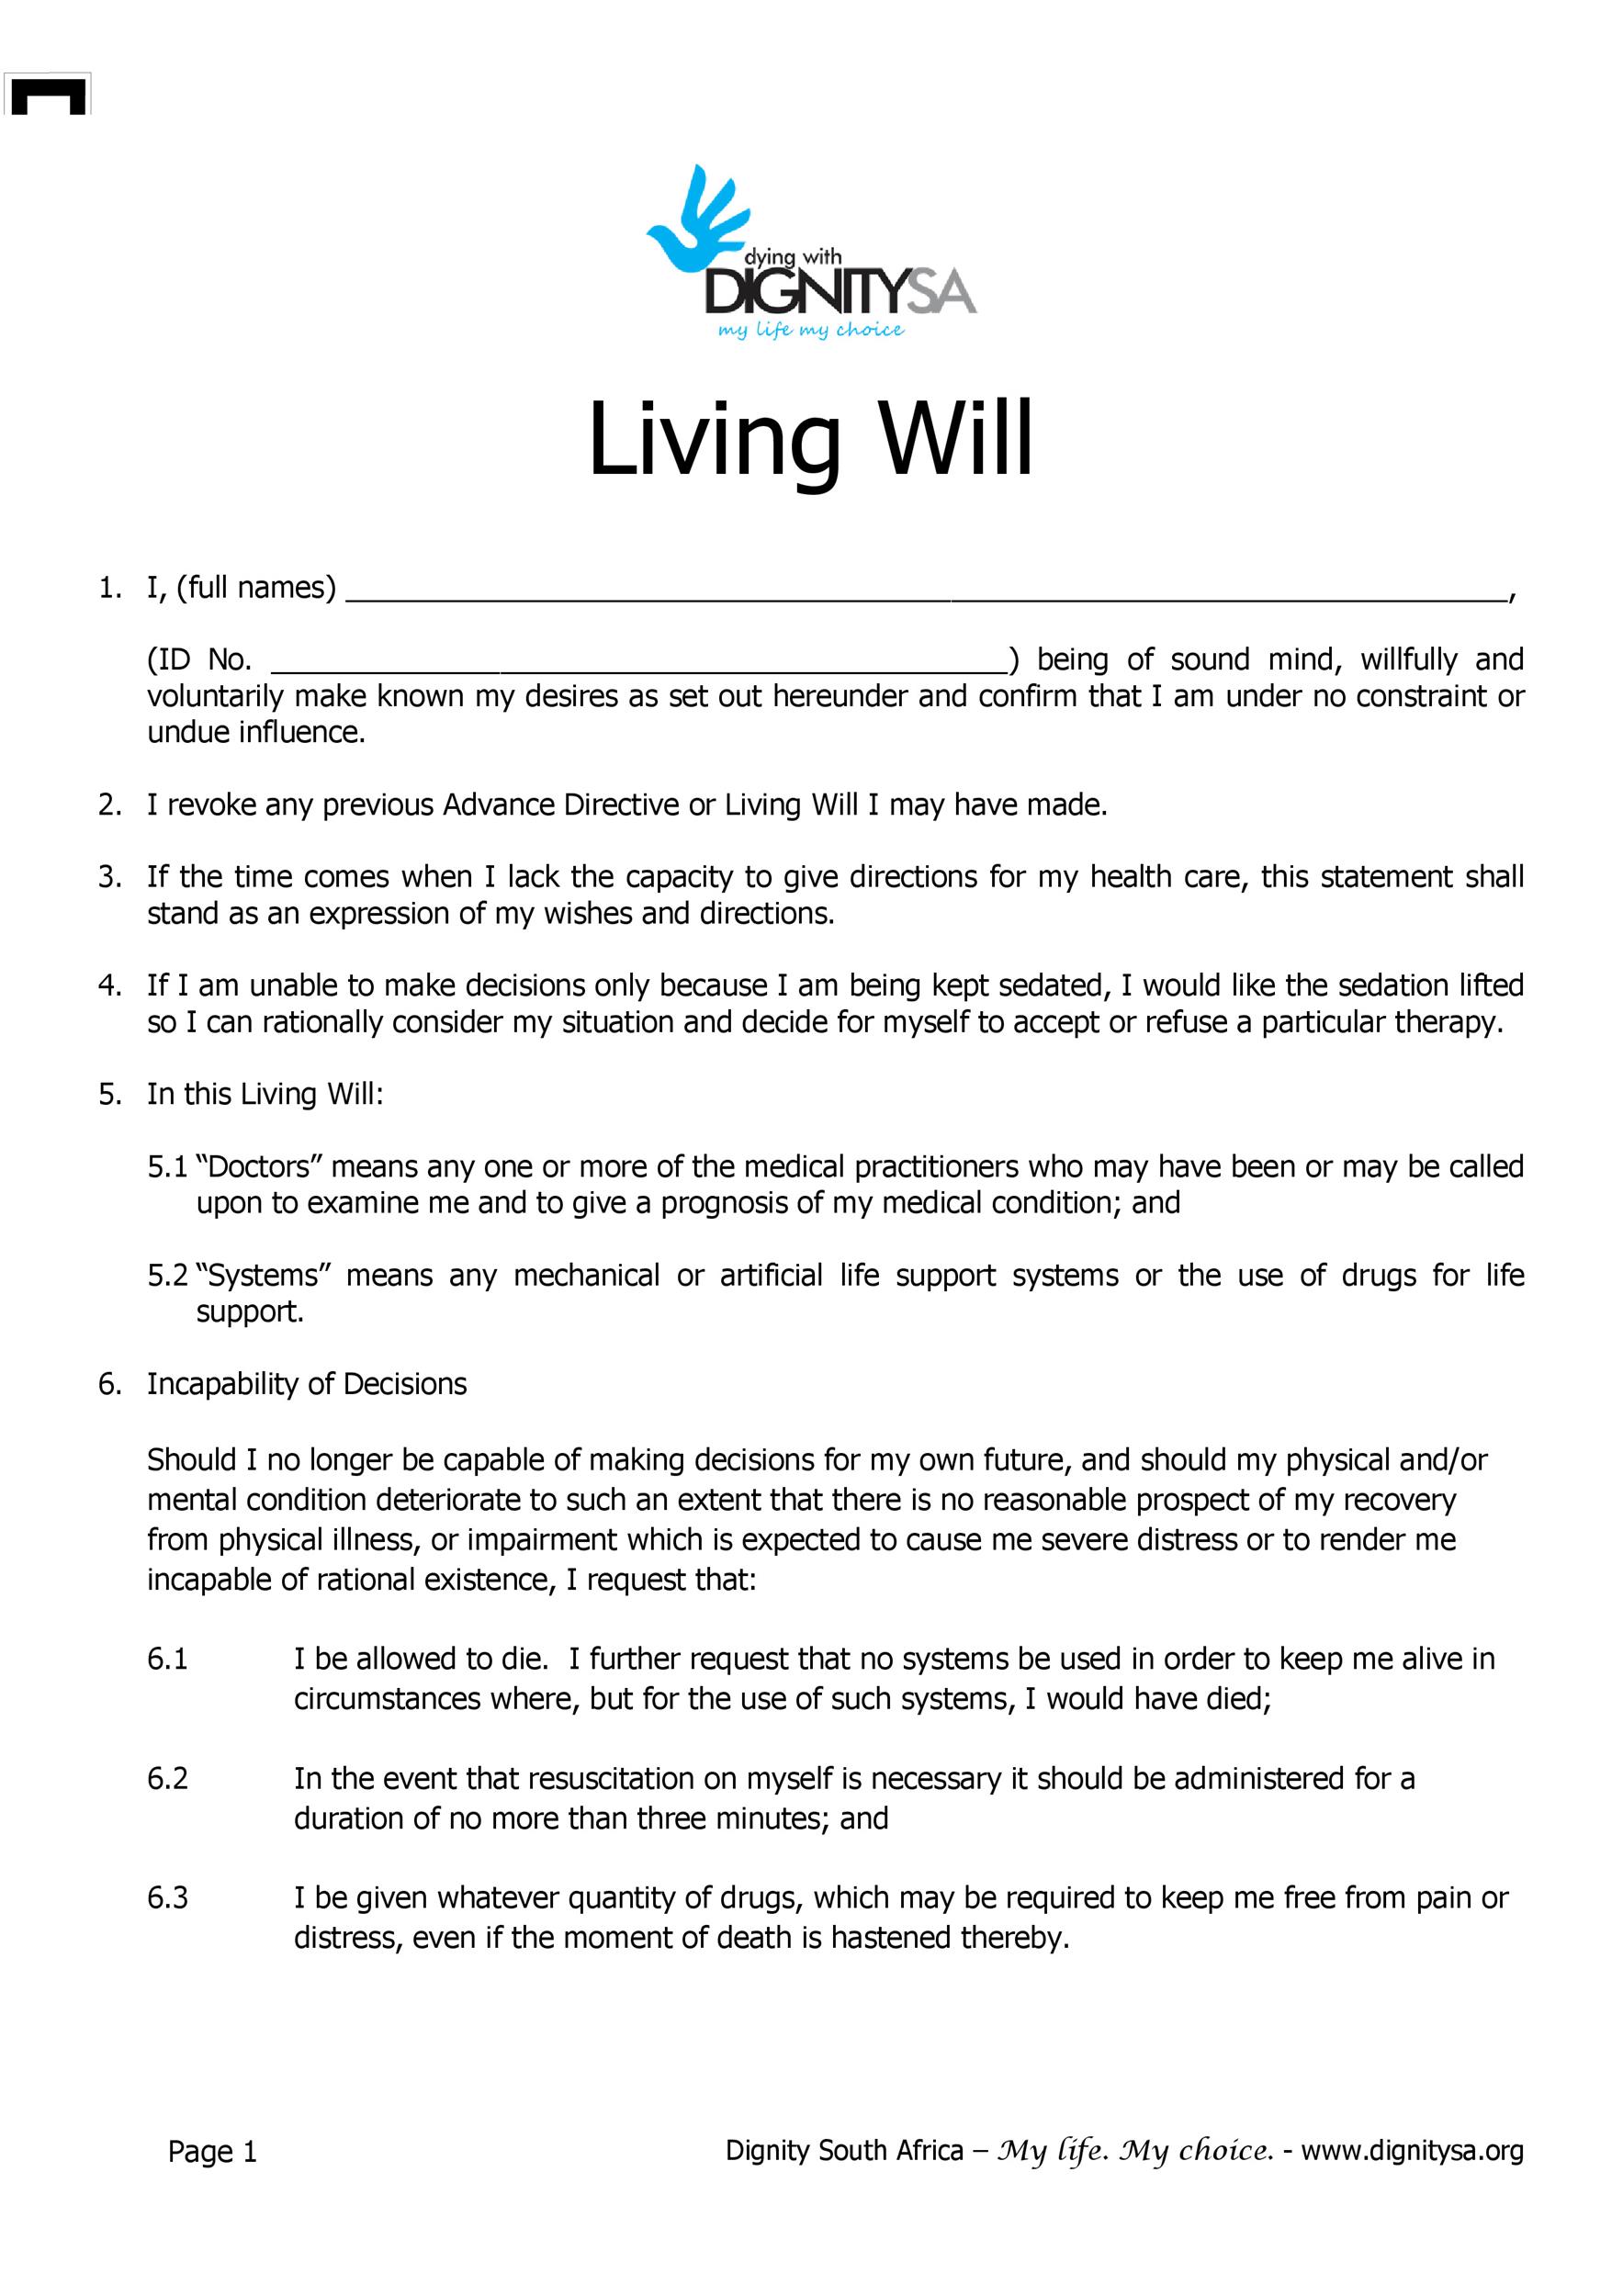 50 Free Living Will Templates Forms ALL STATES TemplateLab